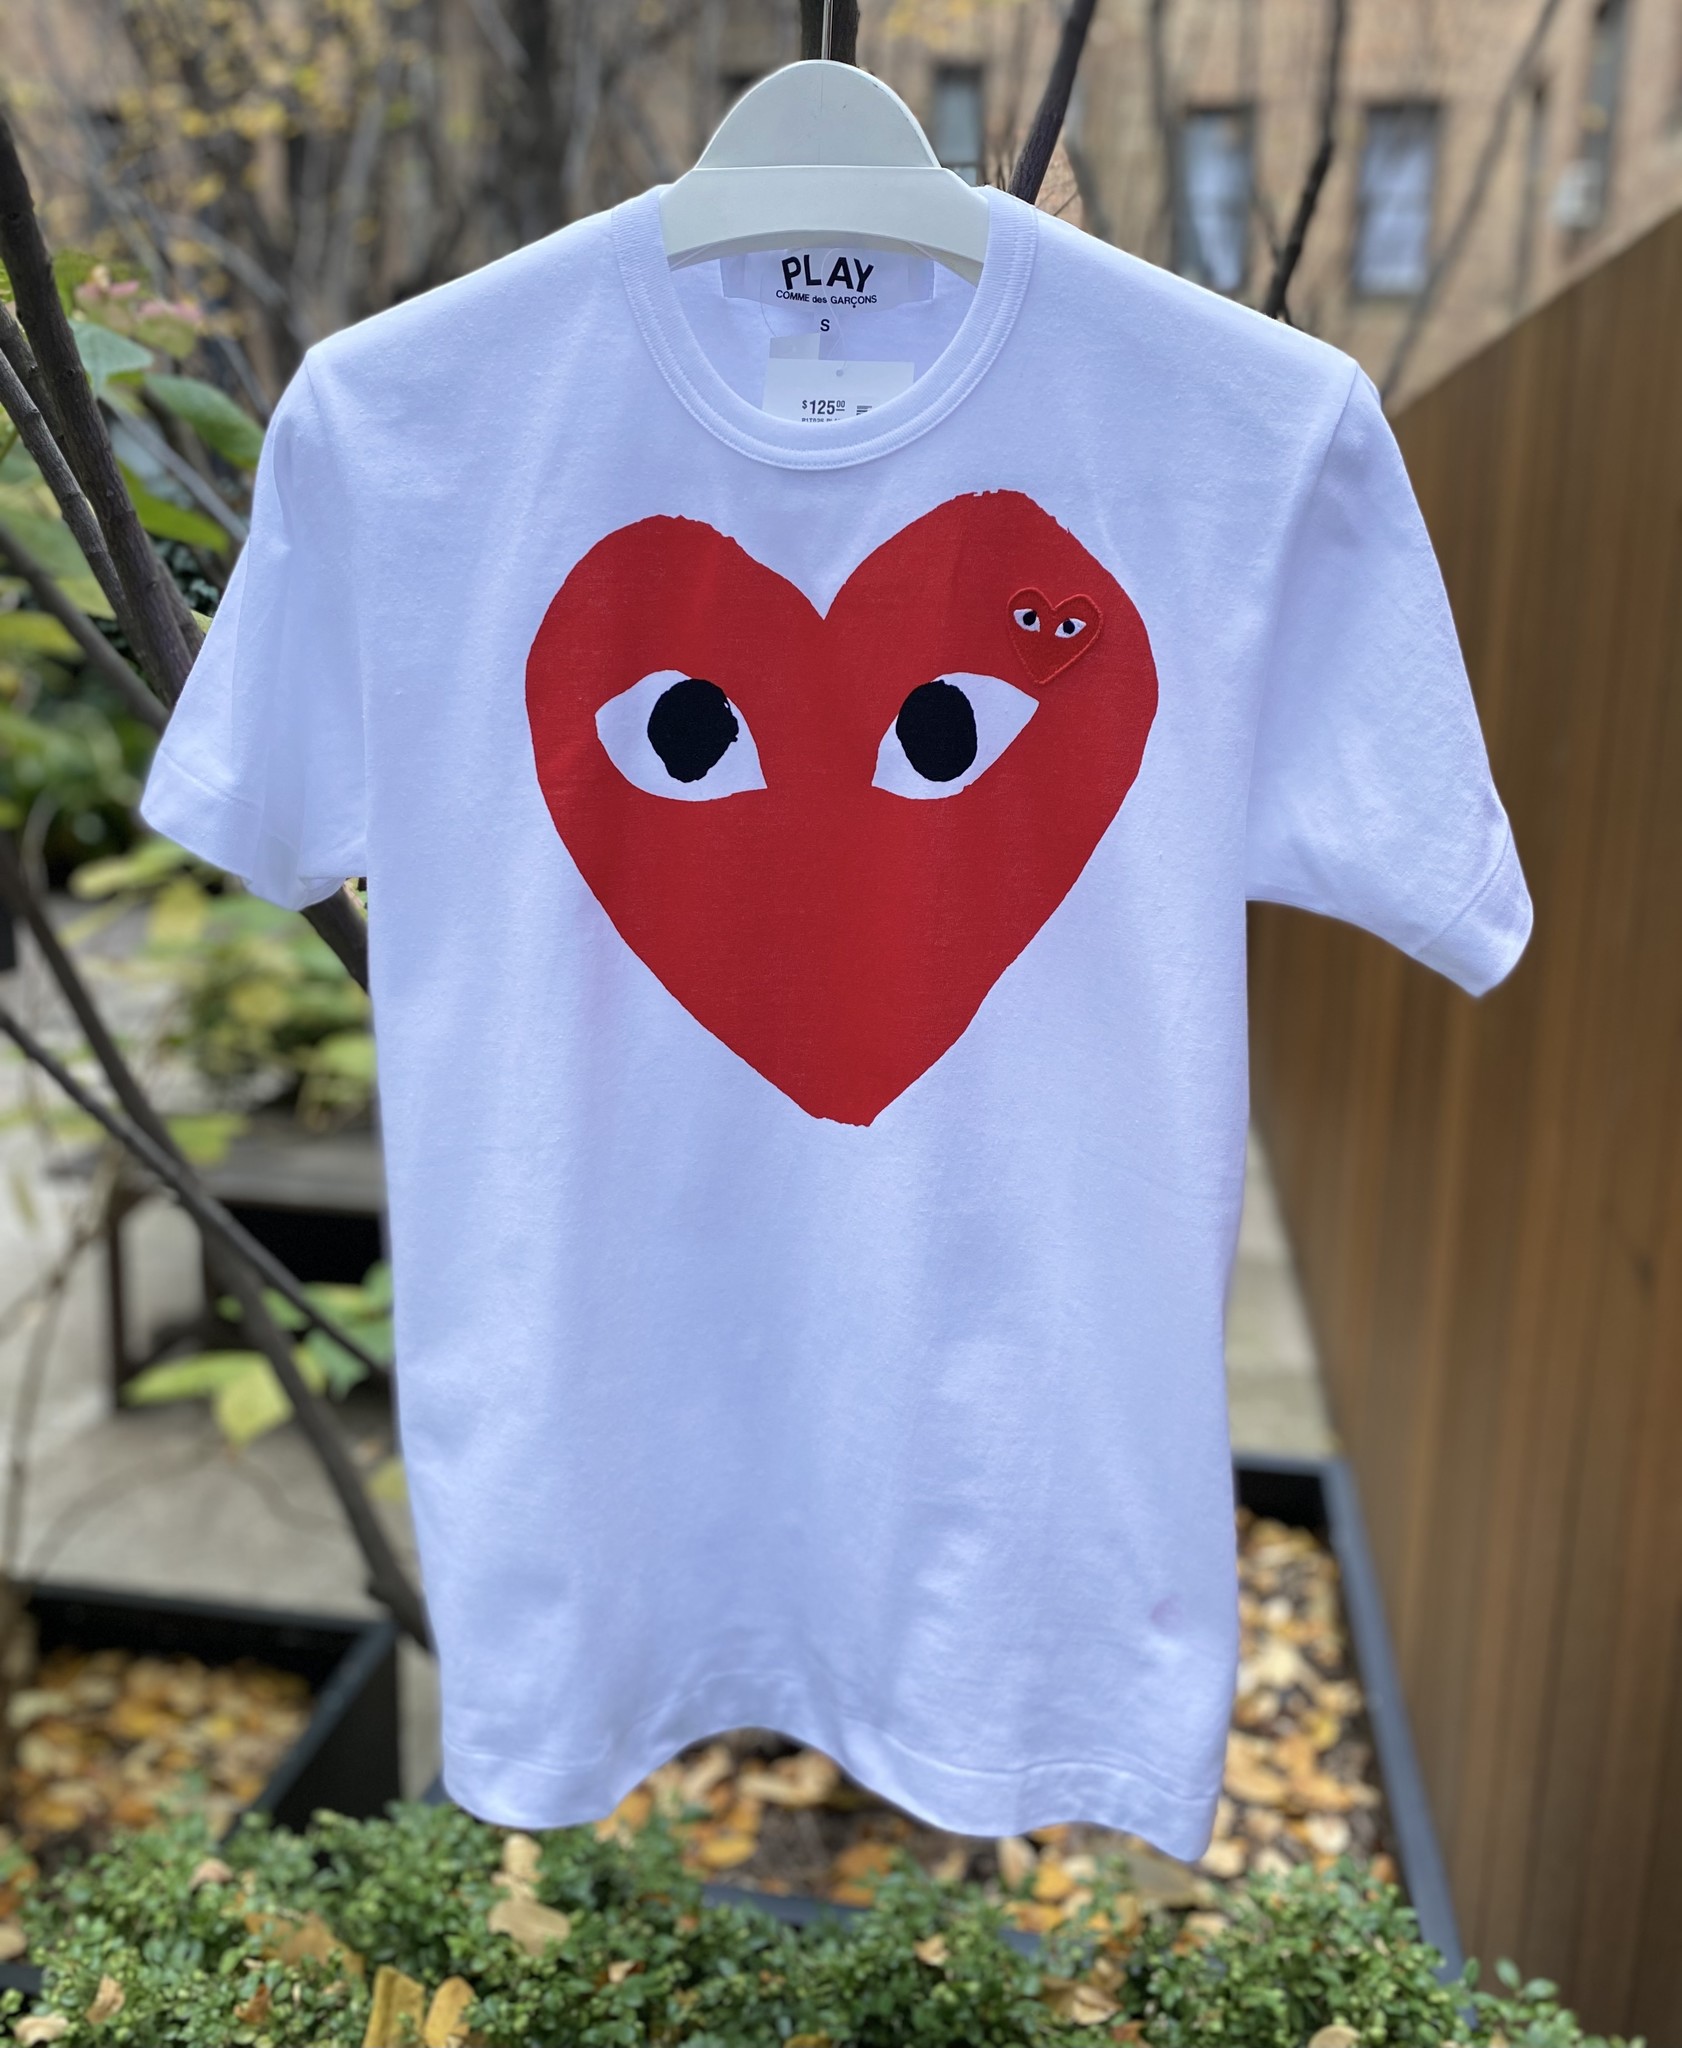 play t shirt with red heart